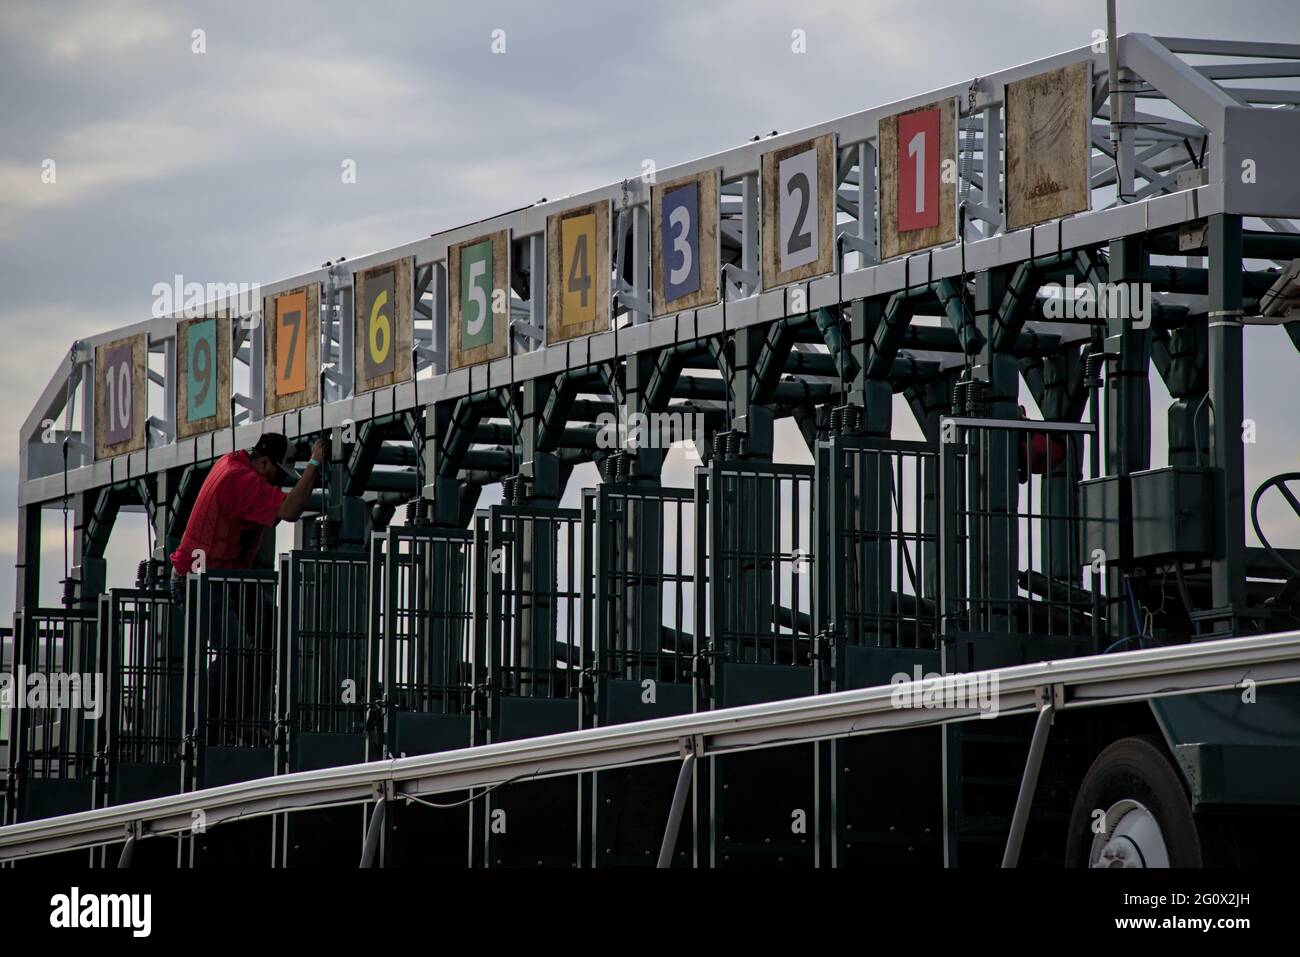 Horse racing gate chute being prepped for the next race by worker changing numbers and closing doors while horses prepare to enter. Stock Photo